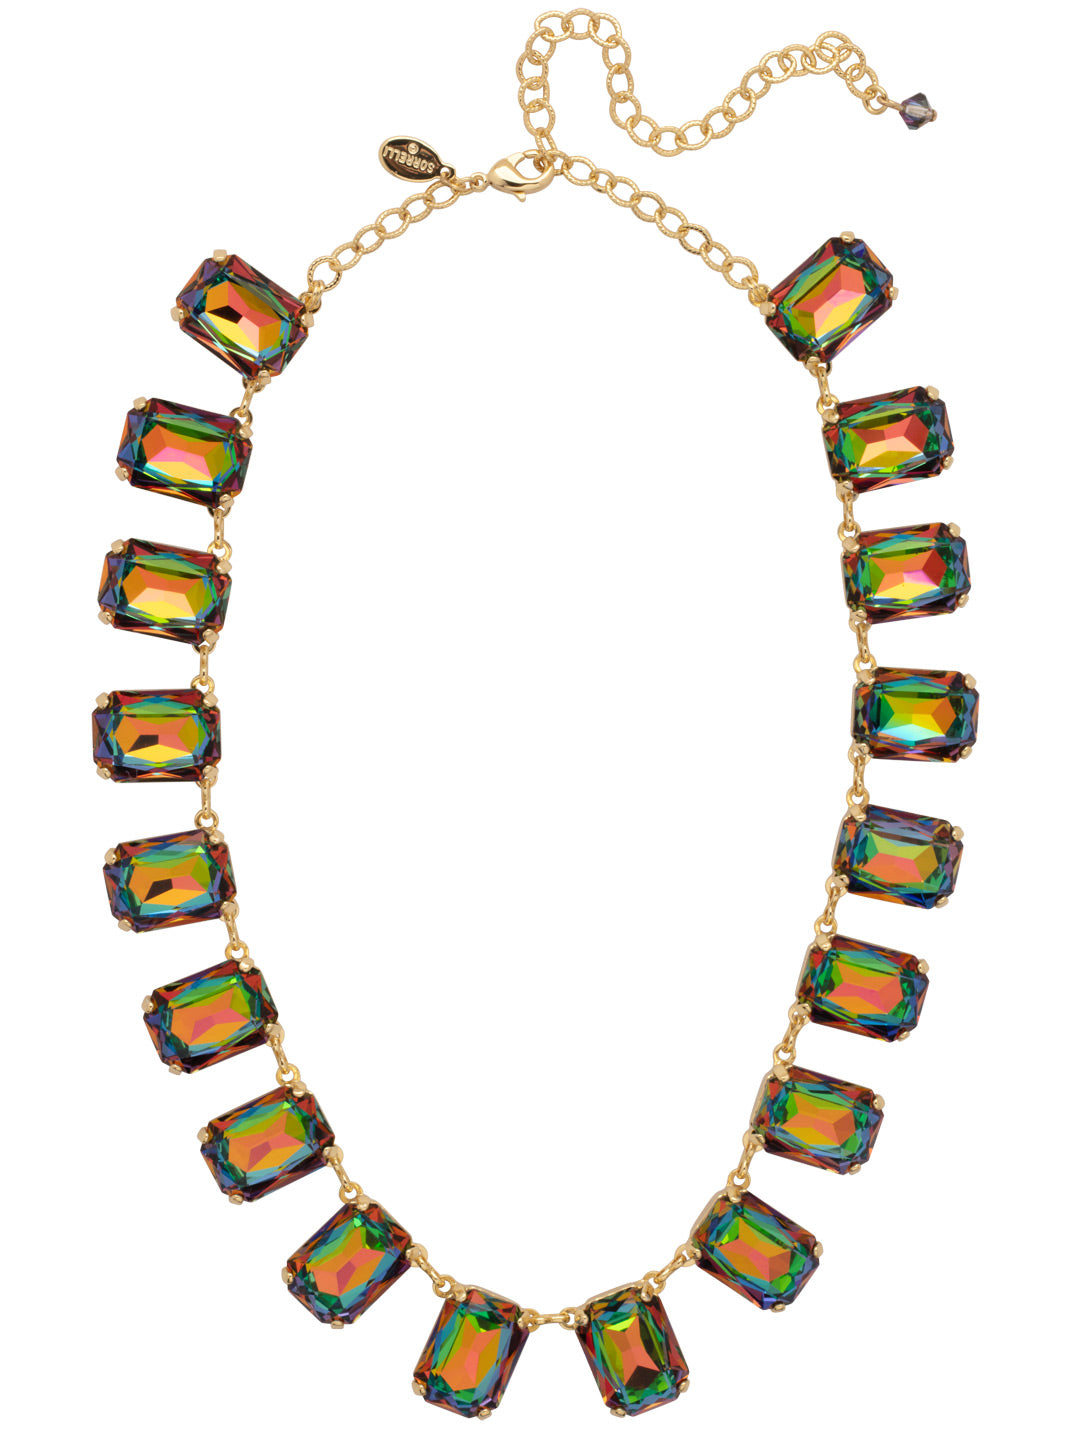 Julianna Emerald Statement Necklace - NFD77BGVO - <p>The Julianna Emerald Statement Necklace features a row of octagon cut candy drop crystals around an adjustable chain, secured with a lobster claw clasp. From Sorrelli's Volcano collection in our Bright Gold-tone finish.</p>